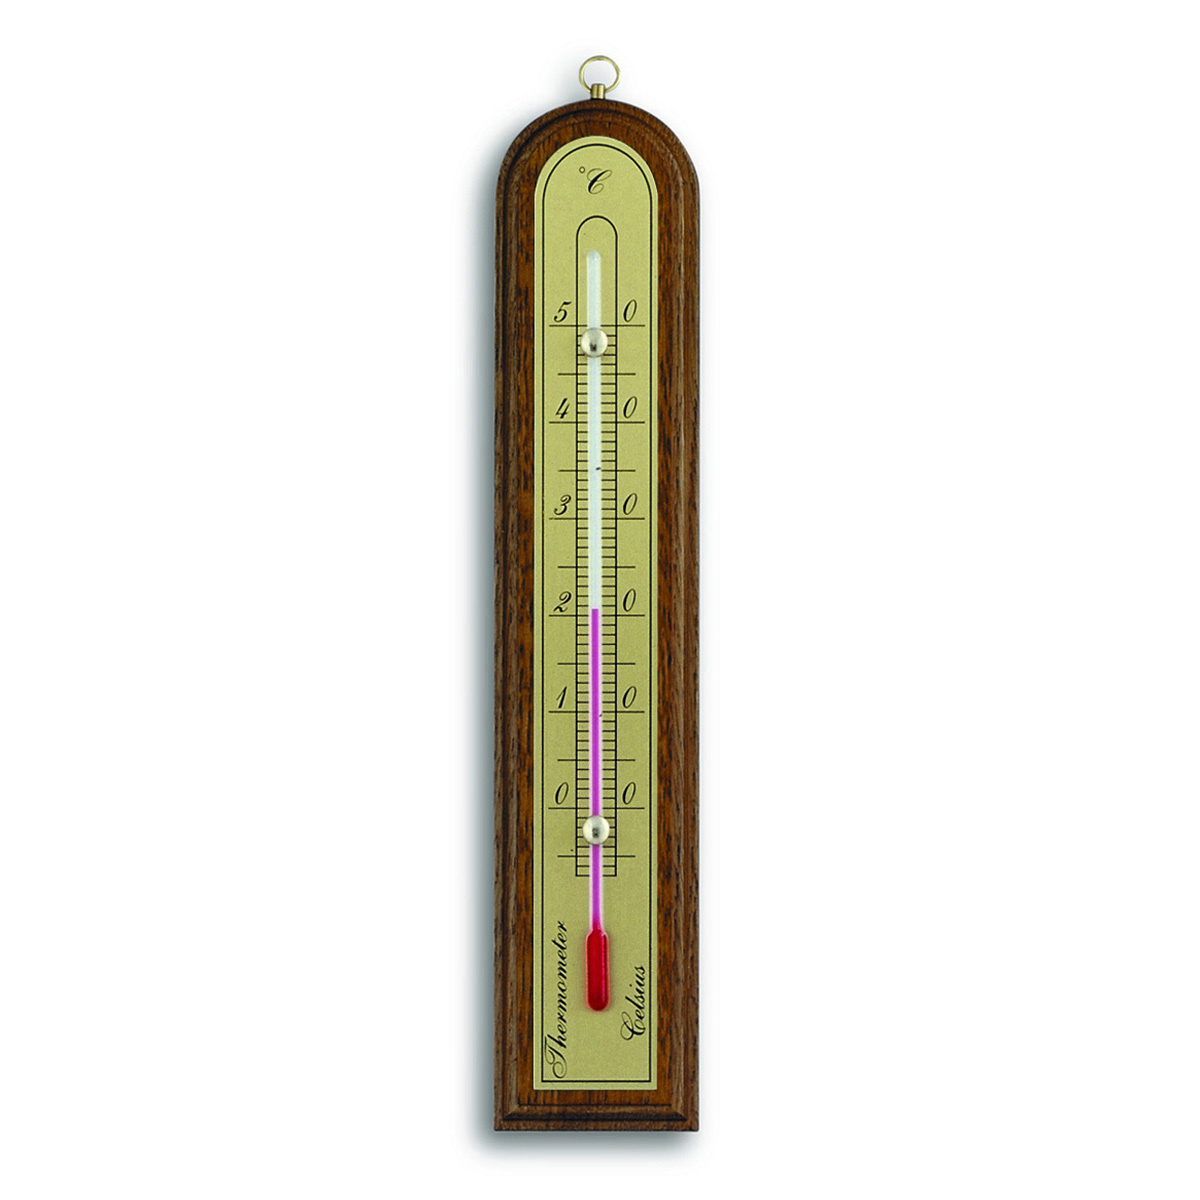 Analogue indoor thermometer made of solid wood